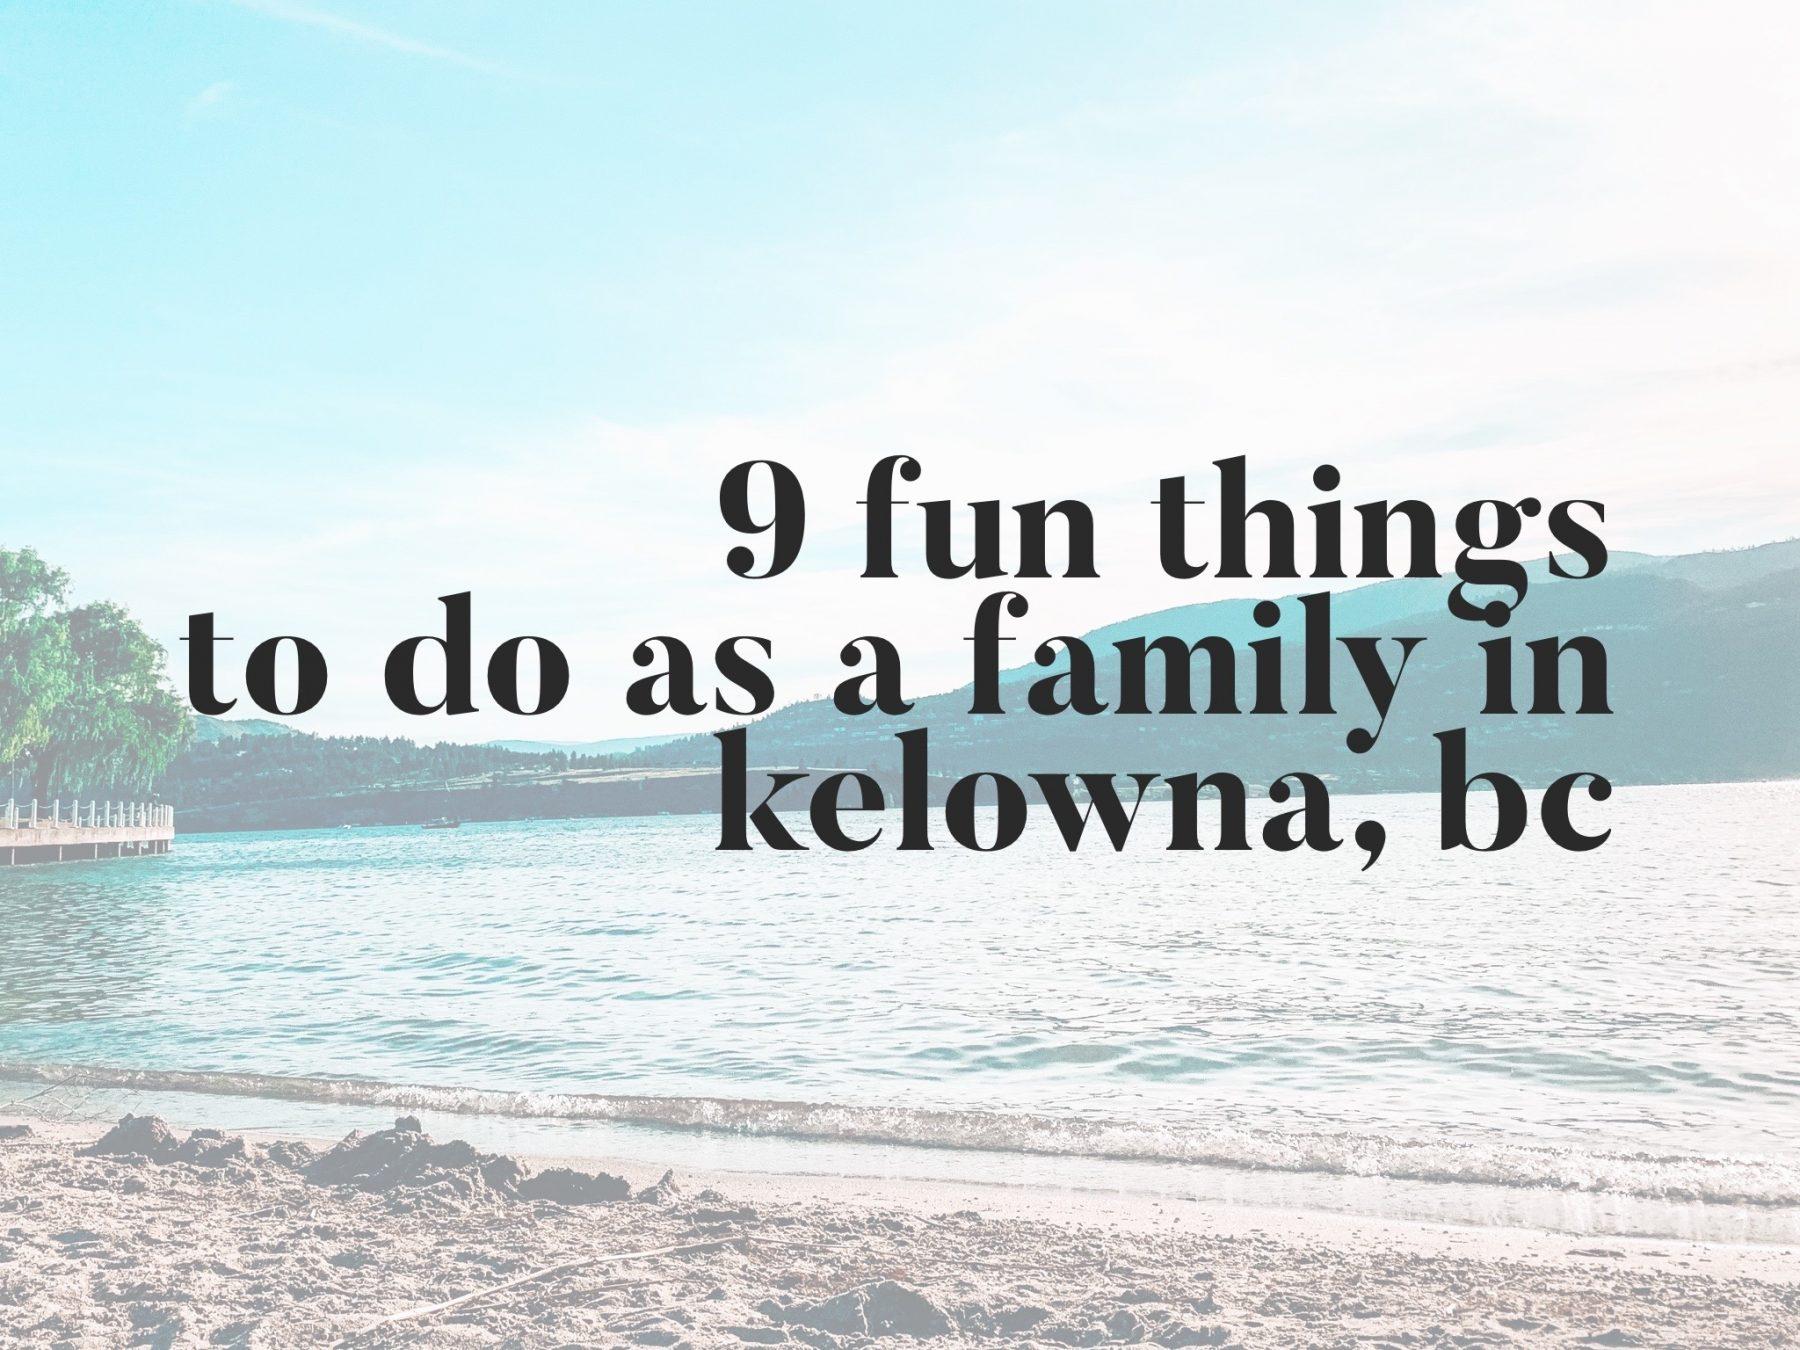 9 Fun Things To Do As A Family in Kelowna, BC